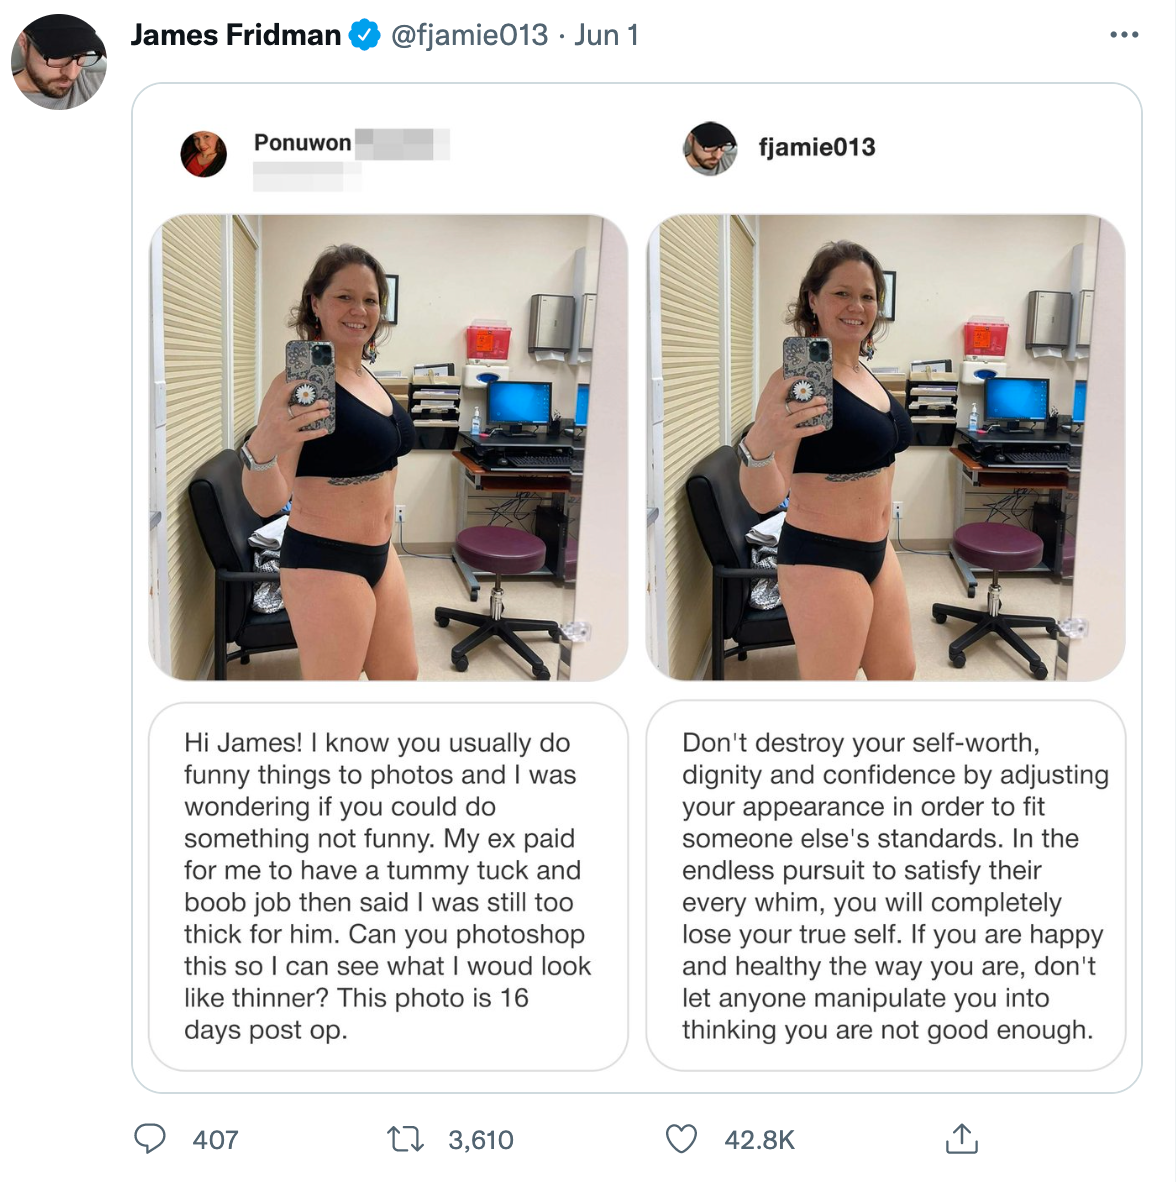 wholesome photoshop edits - james fridman photoshop jim - James Fridman . Jun 1 Ponuwon 407 Firt Hi James! I know you usually do funny things to photos and I was wondering if you could do something not funny. My ex paid for me to have a tummy tuck and boo